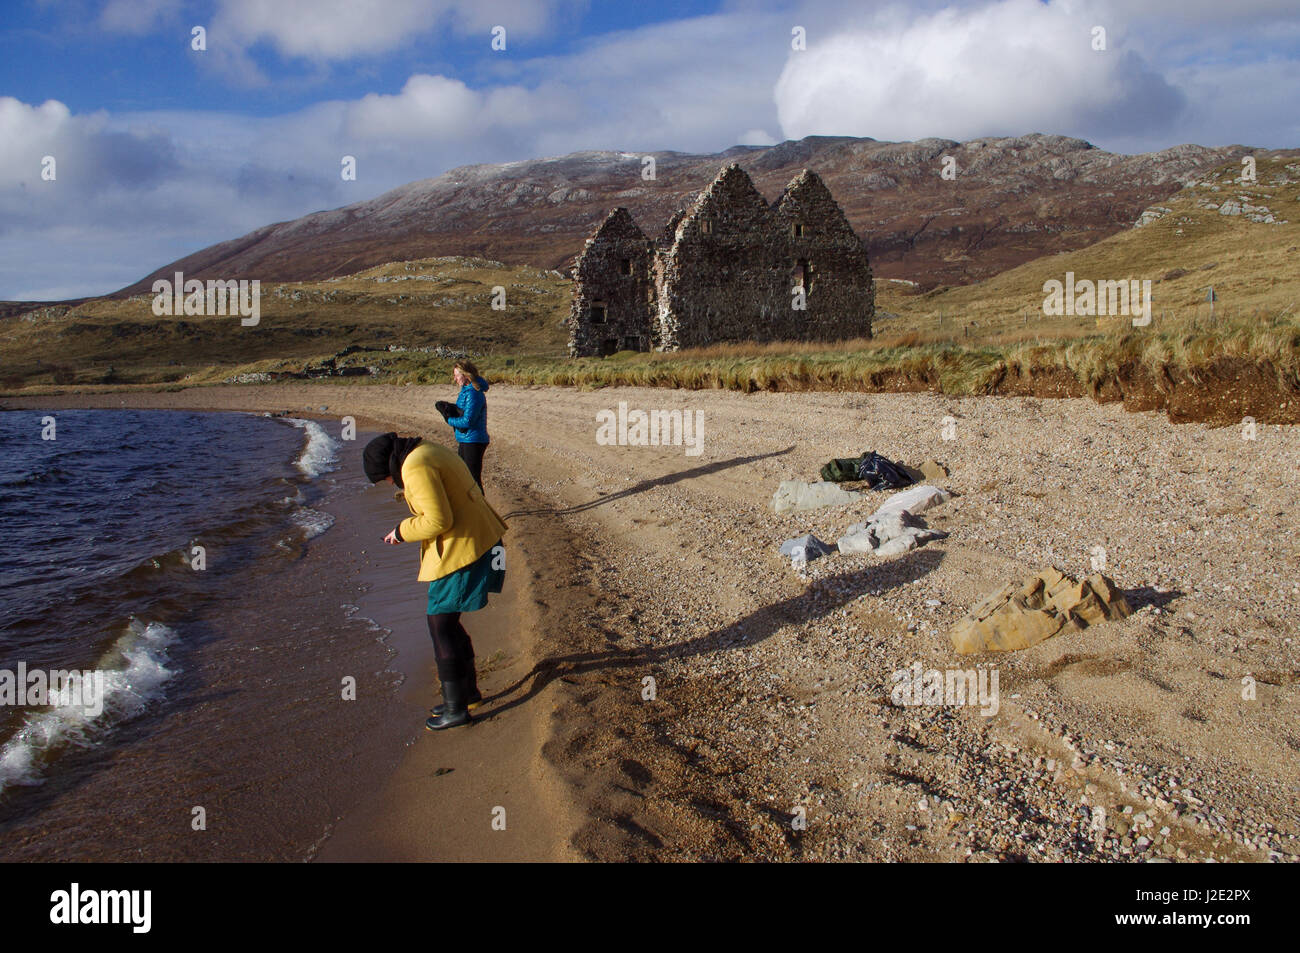 Suumer in Scotland at loch assynt shore, Inchnadamph, Sutherland. Abandoned croft in the background. Stock Photo